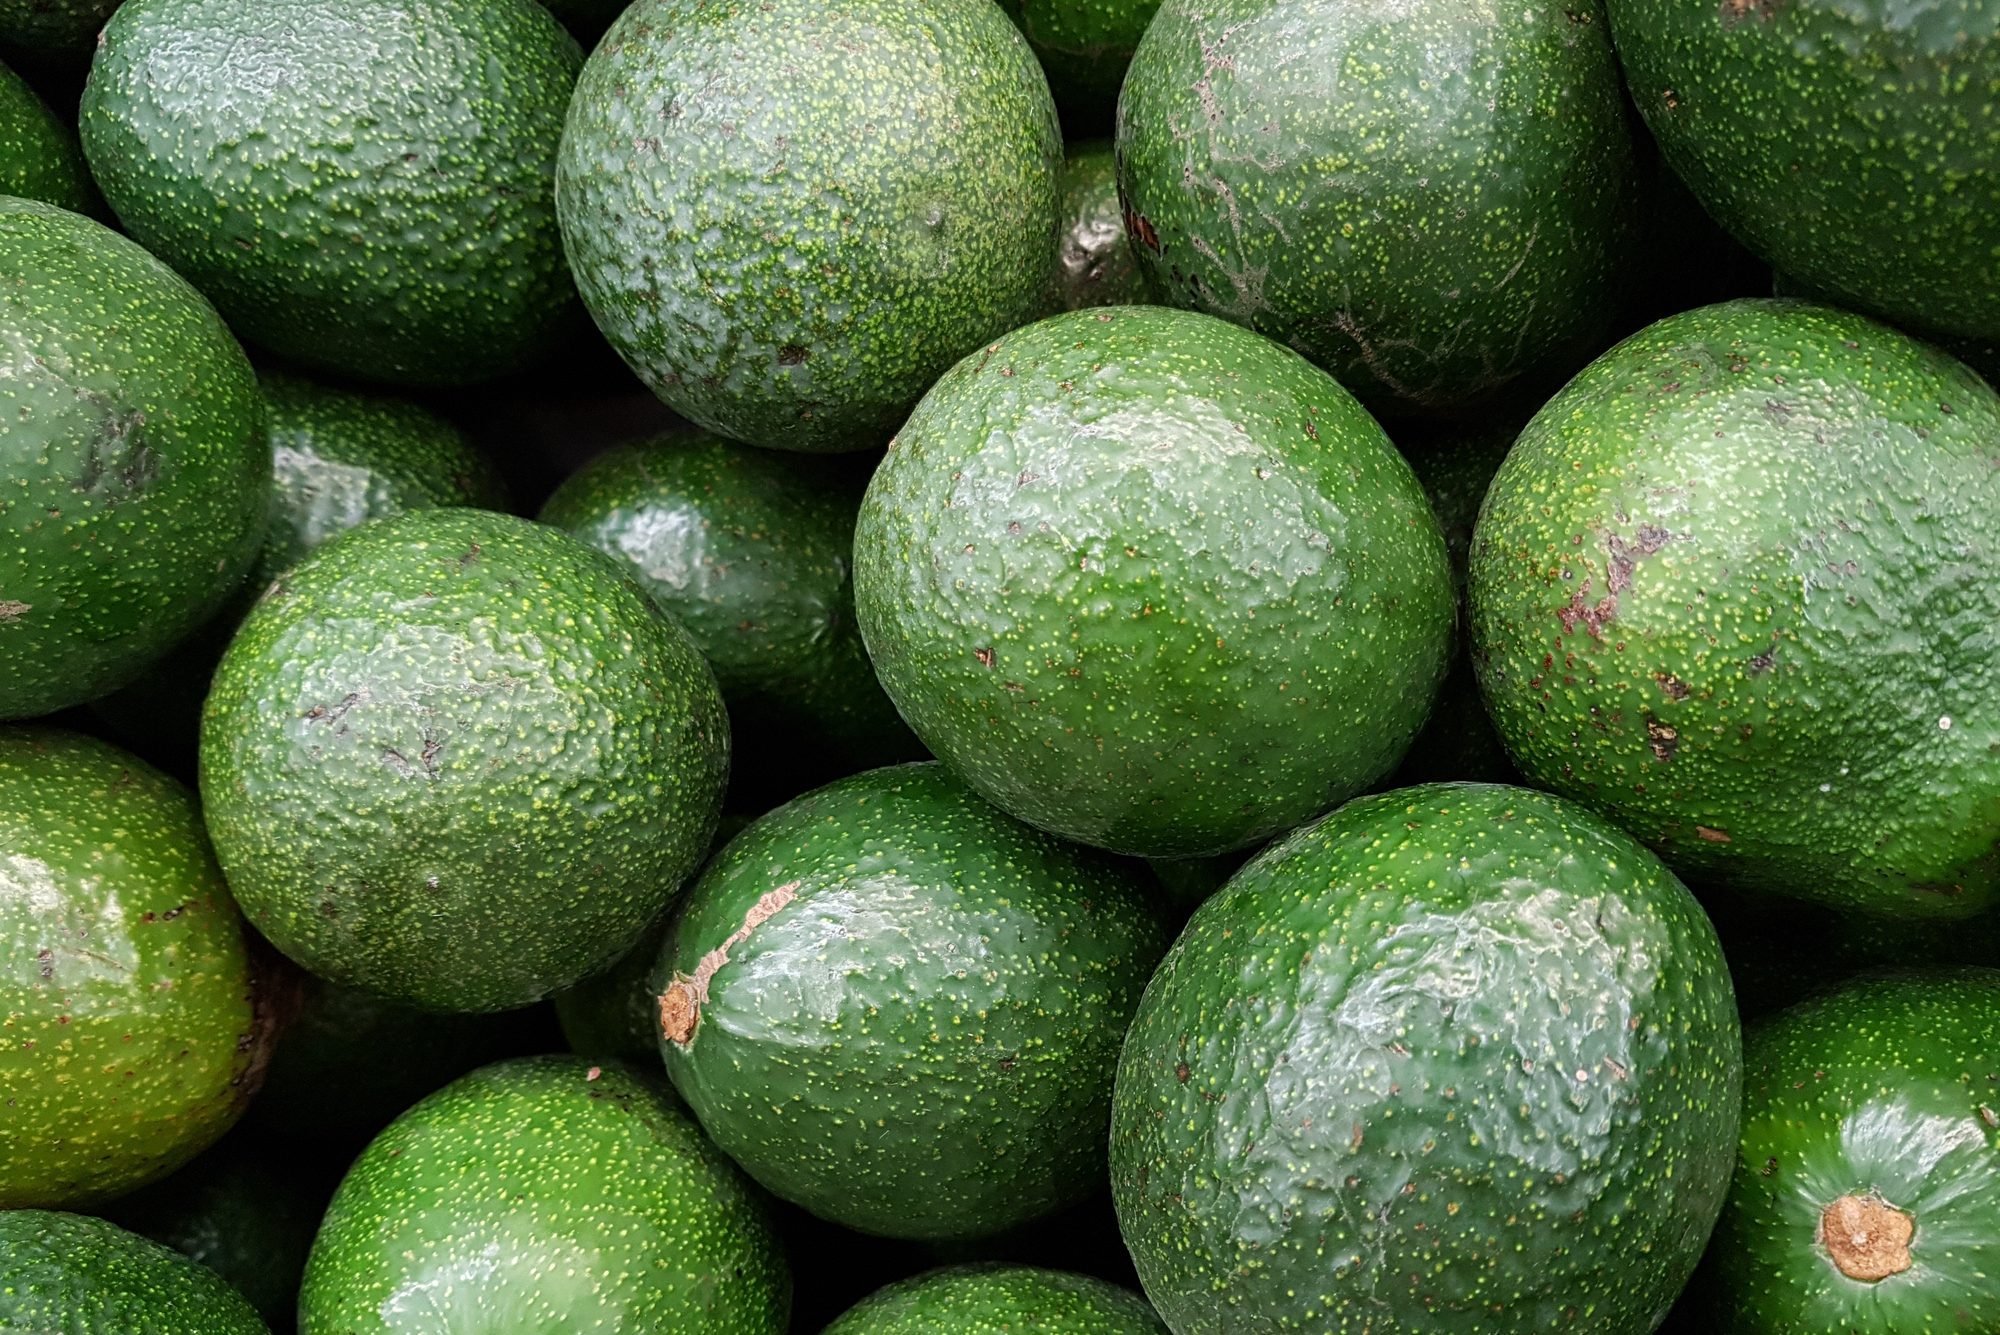 Lots of avocados at the market, full frame